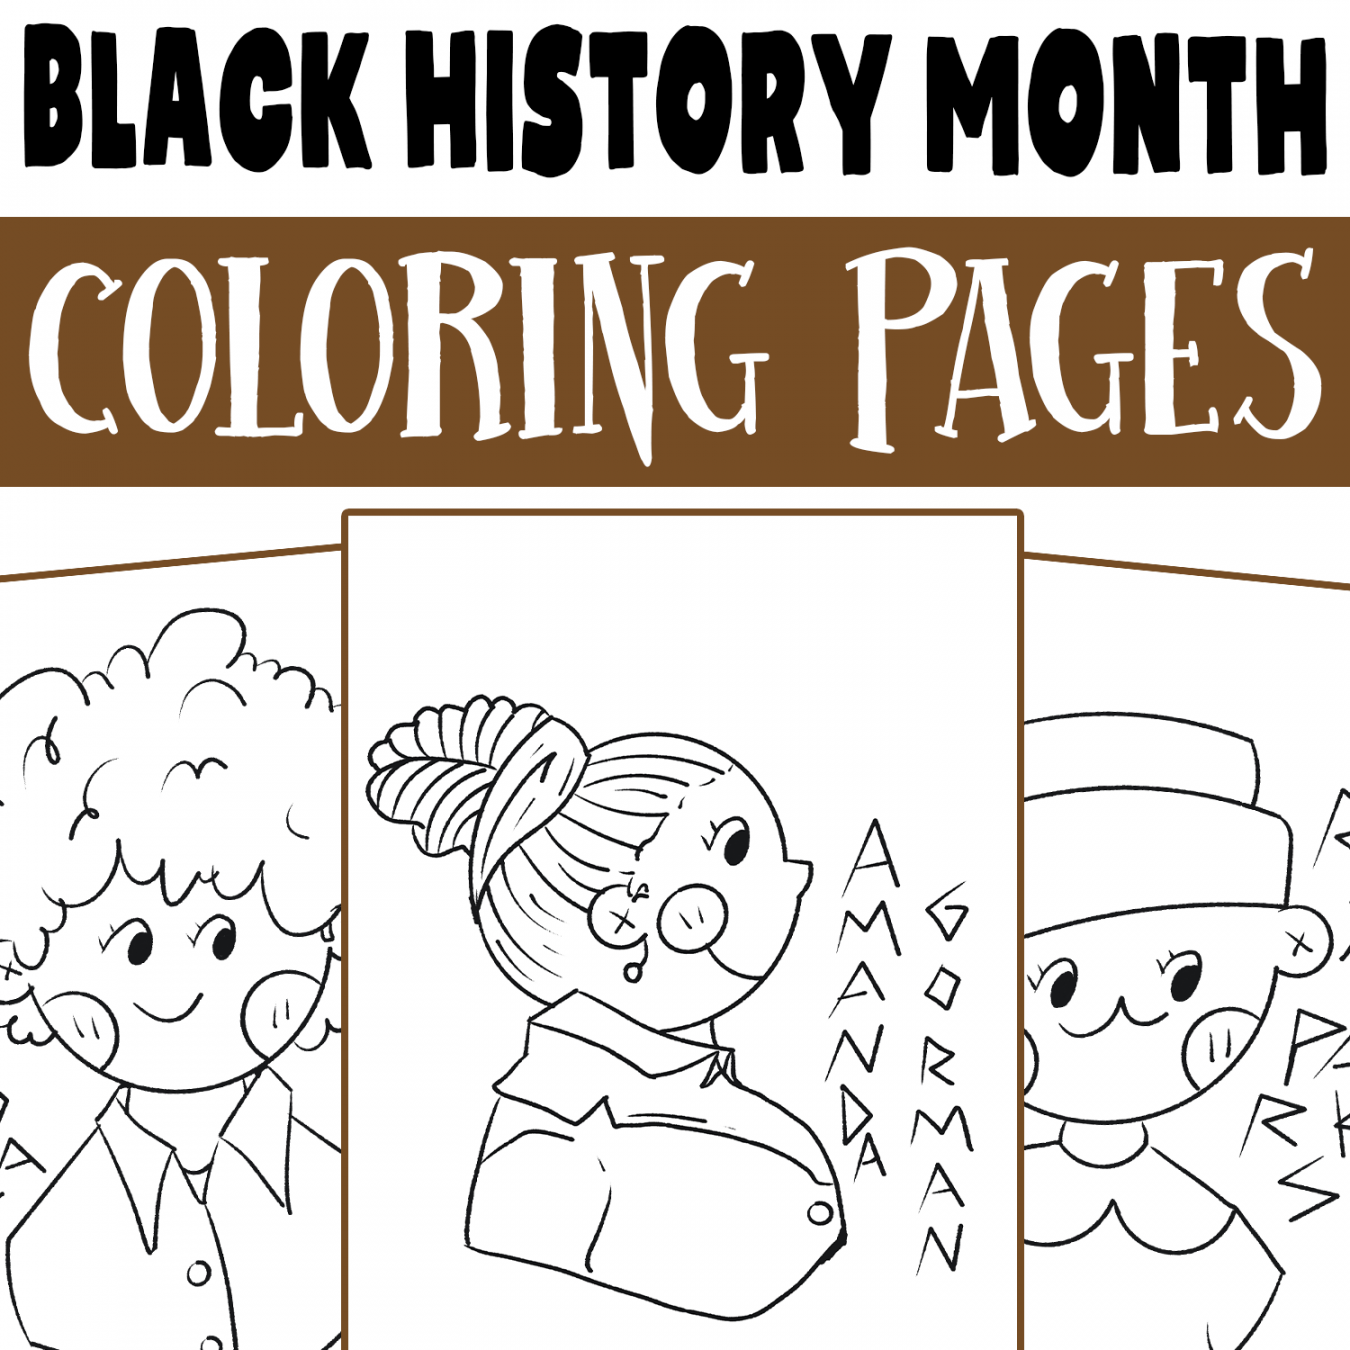 Black History Month Coloring Pages, African History Coloring